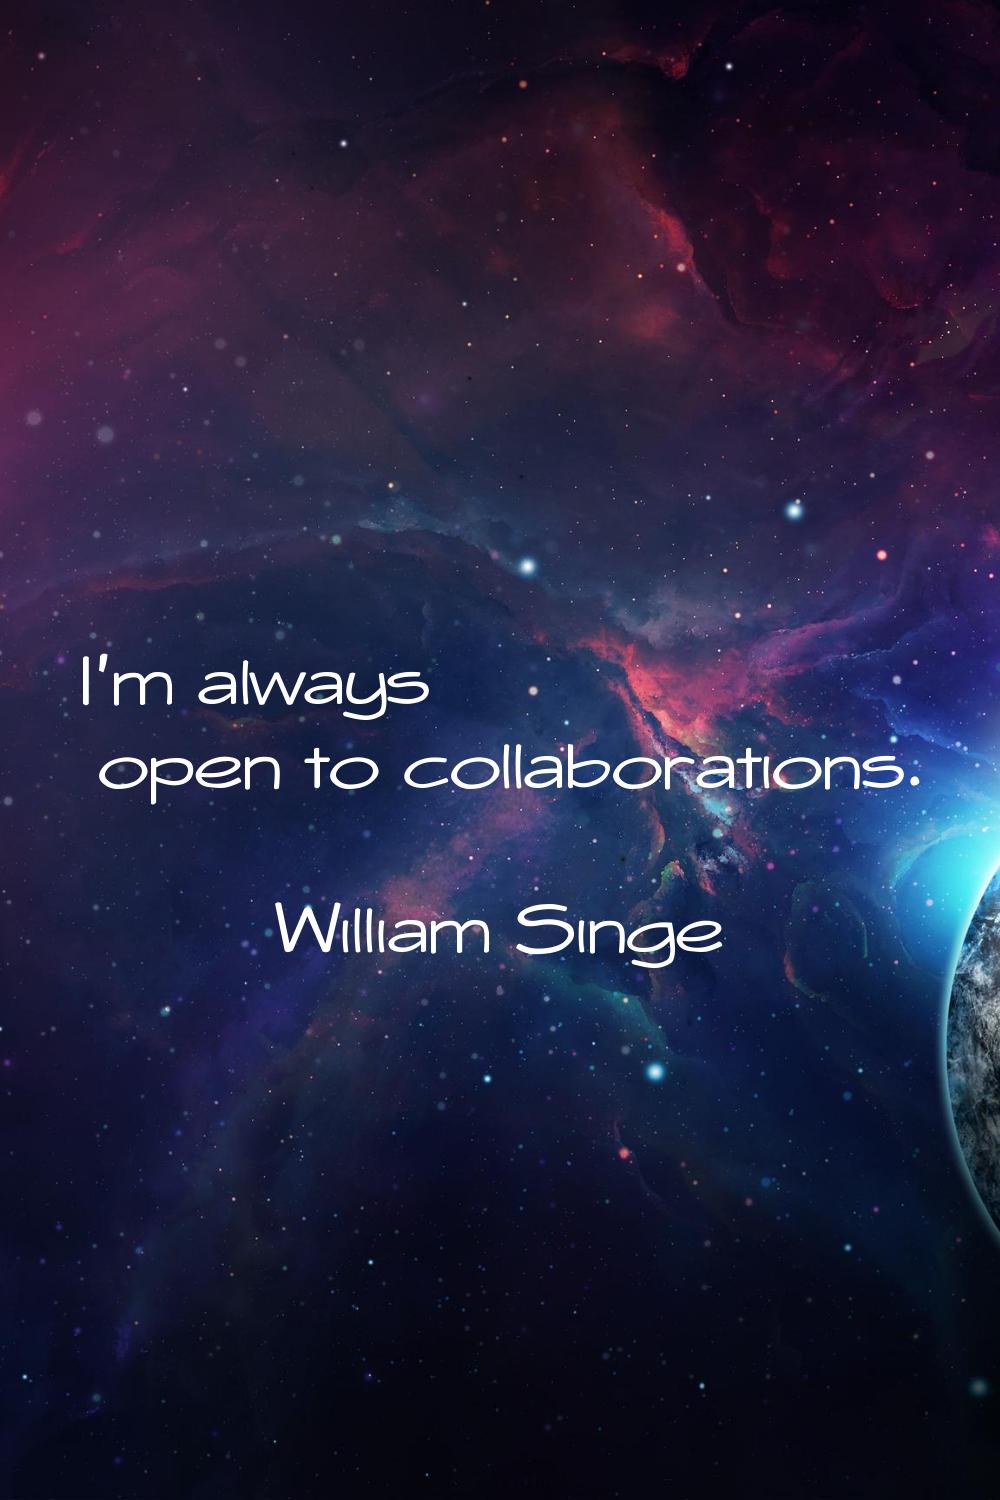 I'm always open to collaborations.